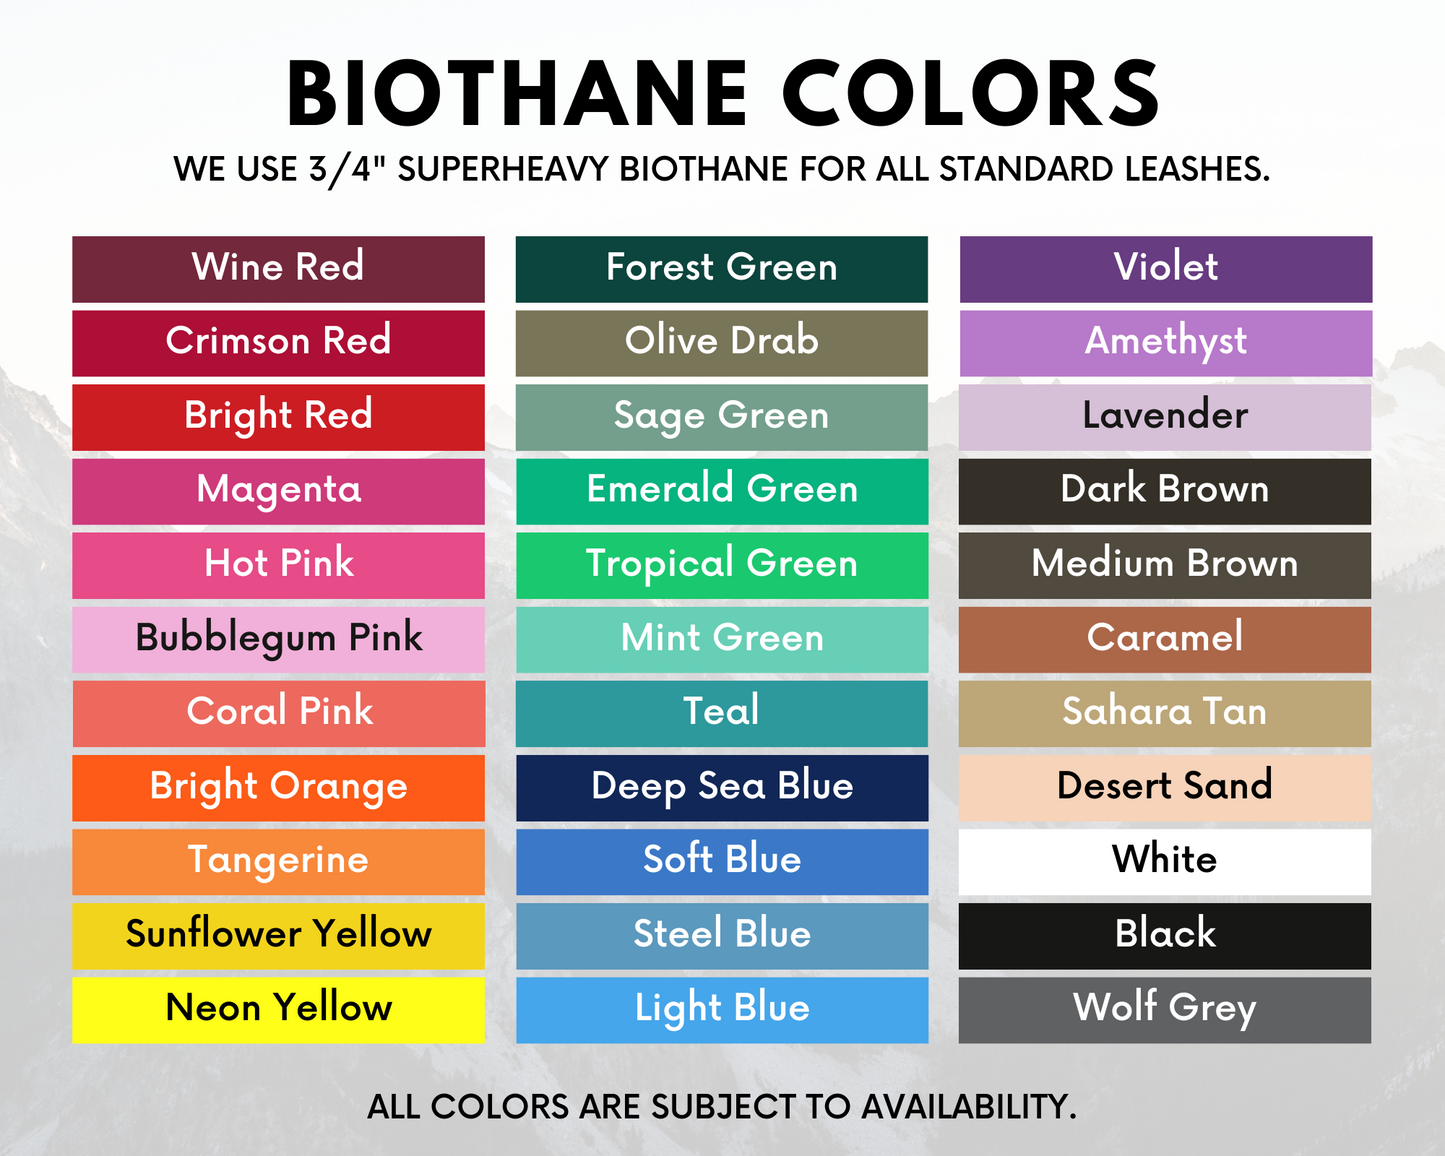 various biothane colors displayed as an infographic.